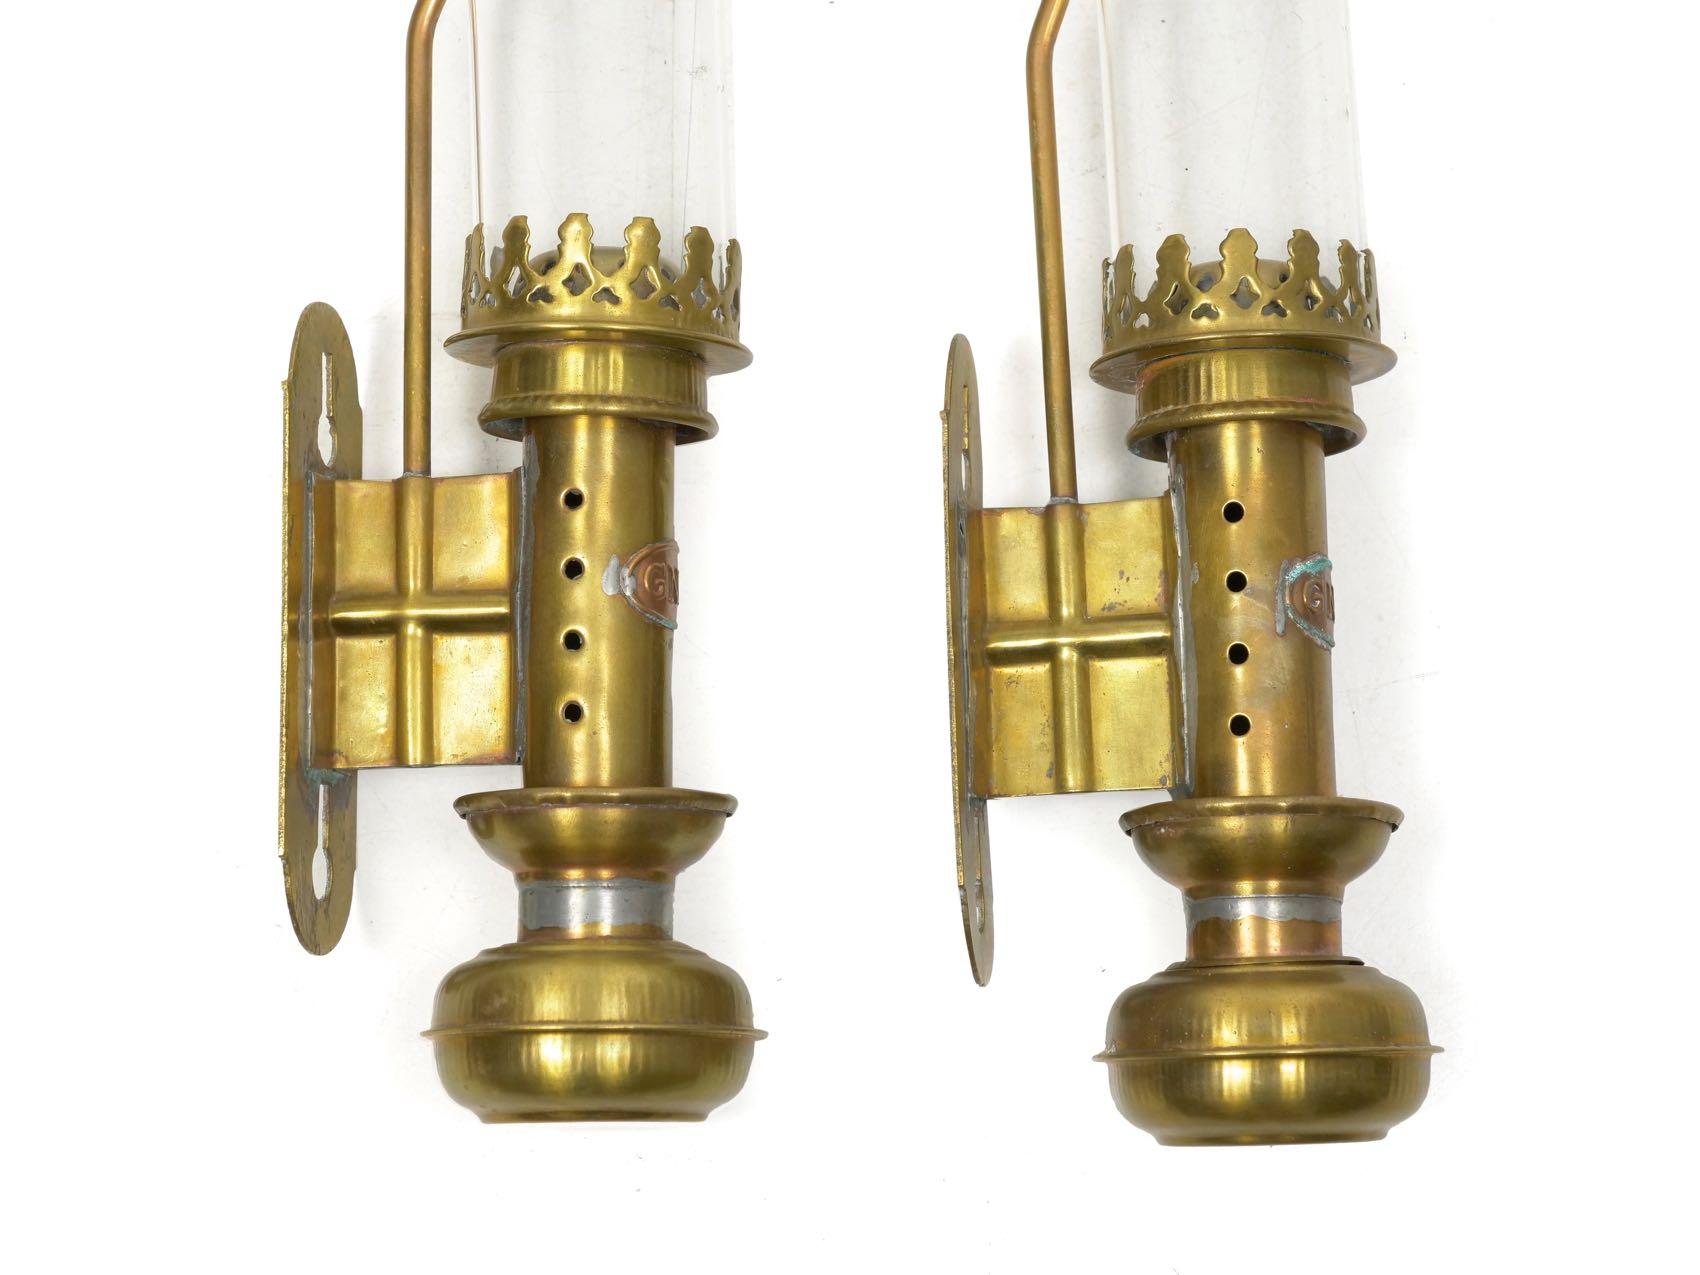 20th Century Pair of Antique Brass and Glass Railway Carriage Candle Light Lamps